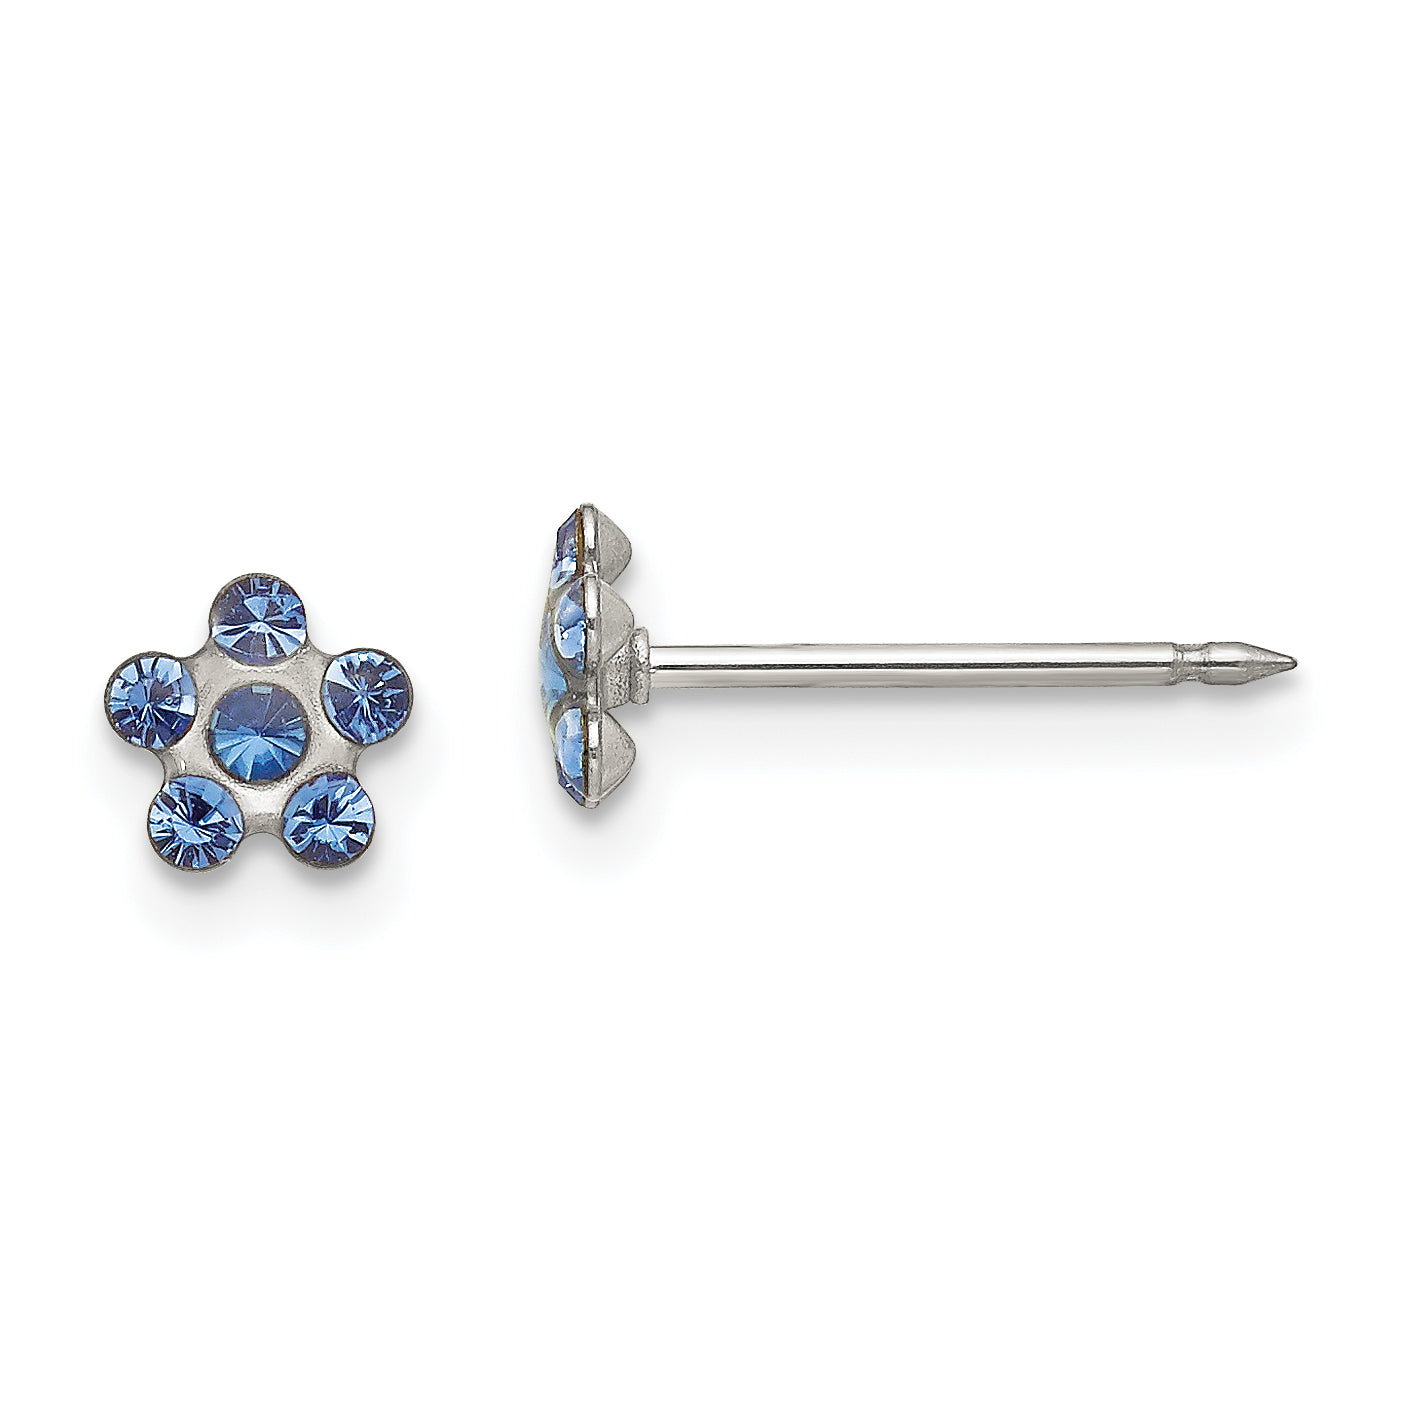 Inverness Stainless Steel Blue Crystal Post Earrings